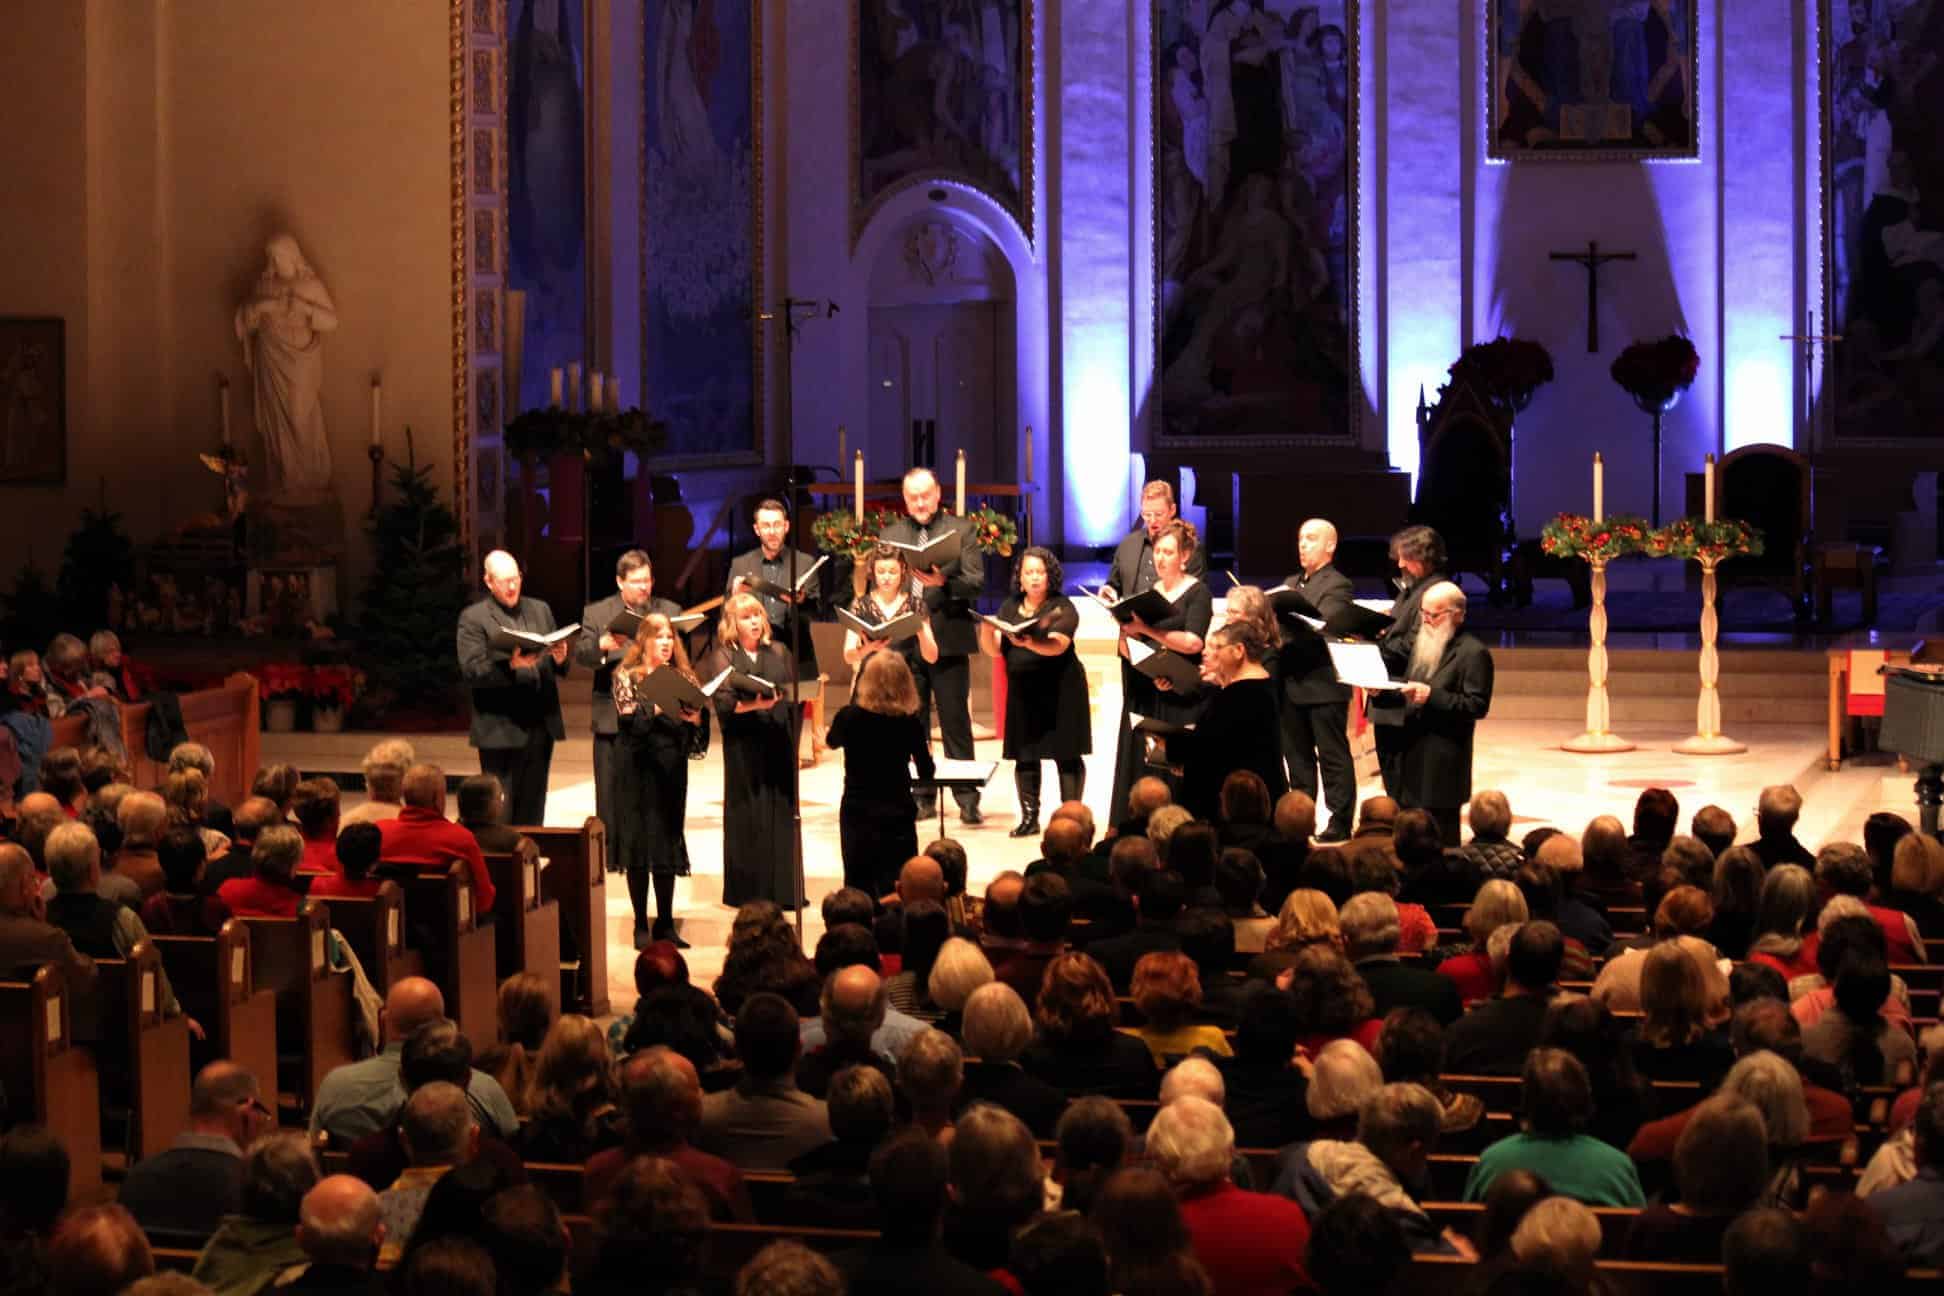 Cappella Romana sings "Carol of the Bells" as an encore, Dec. 22 at St. Mary's Cathedral in Portland